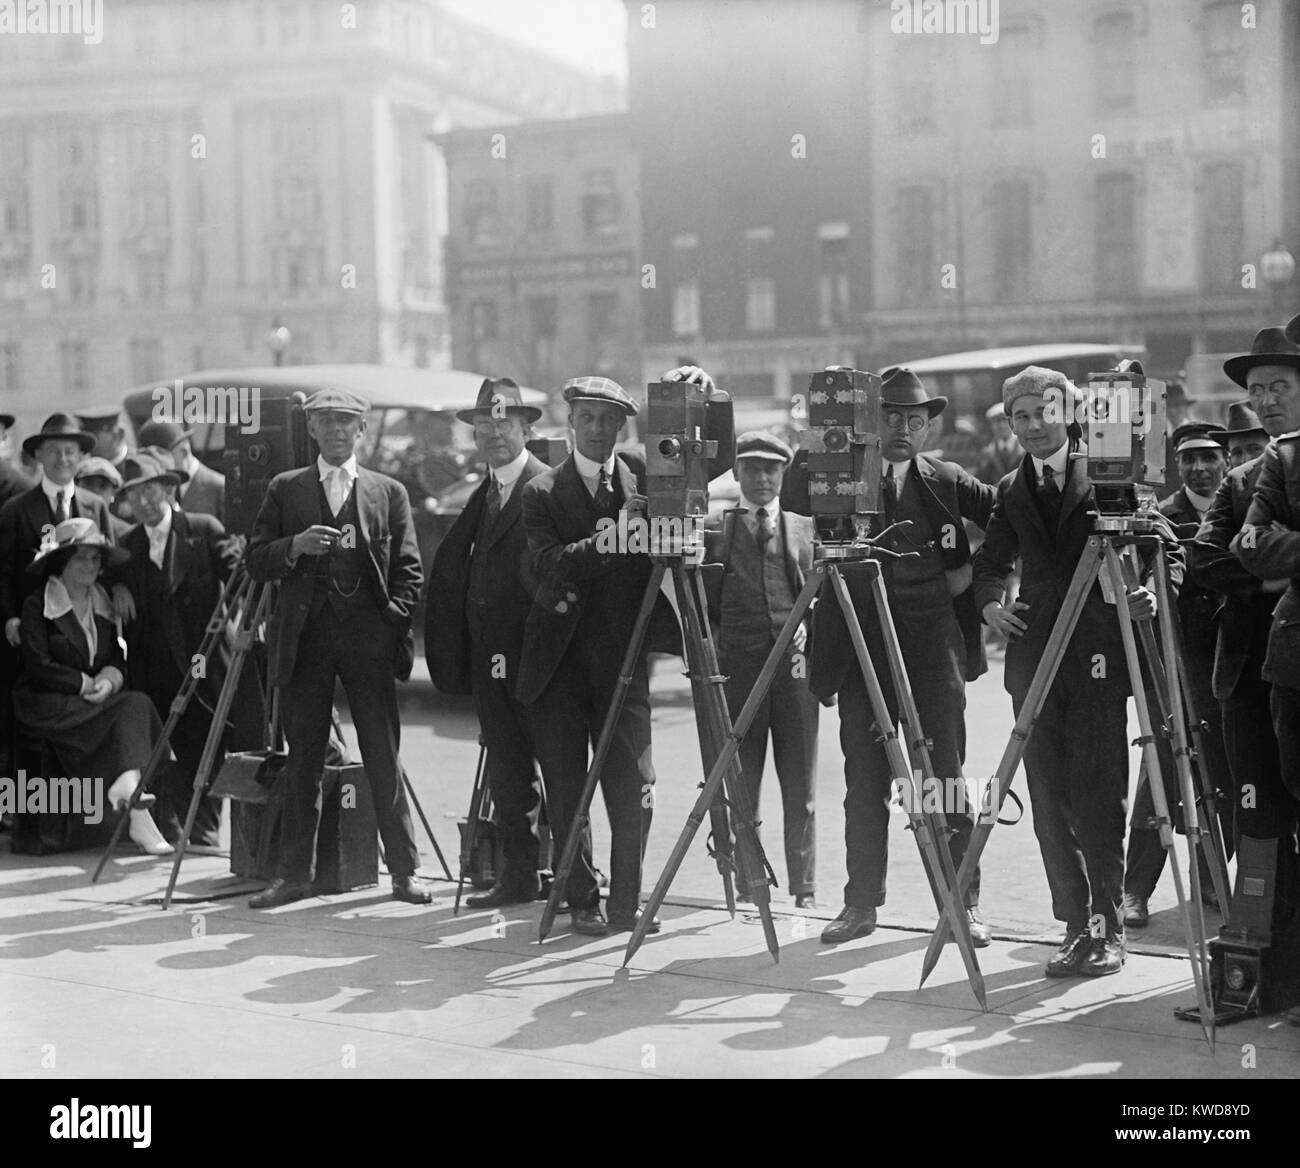 Cameramen in Washington, D.C., waiting to shoot motion pictures for the newsreels, 1920 (BSLOC 2016 8 154) Stock Photo